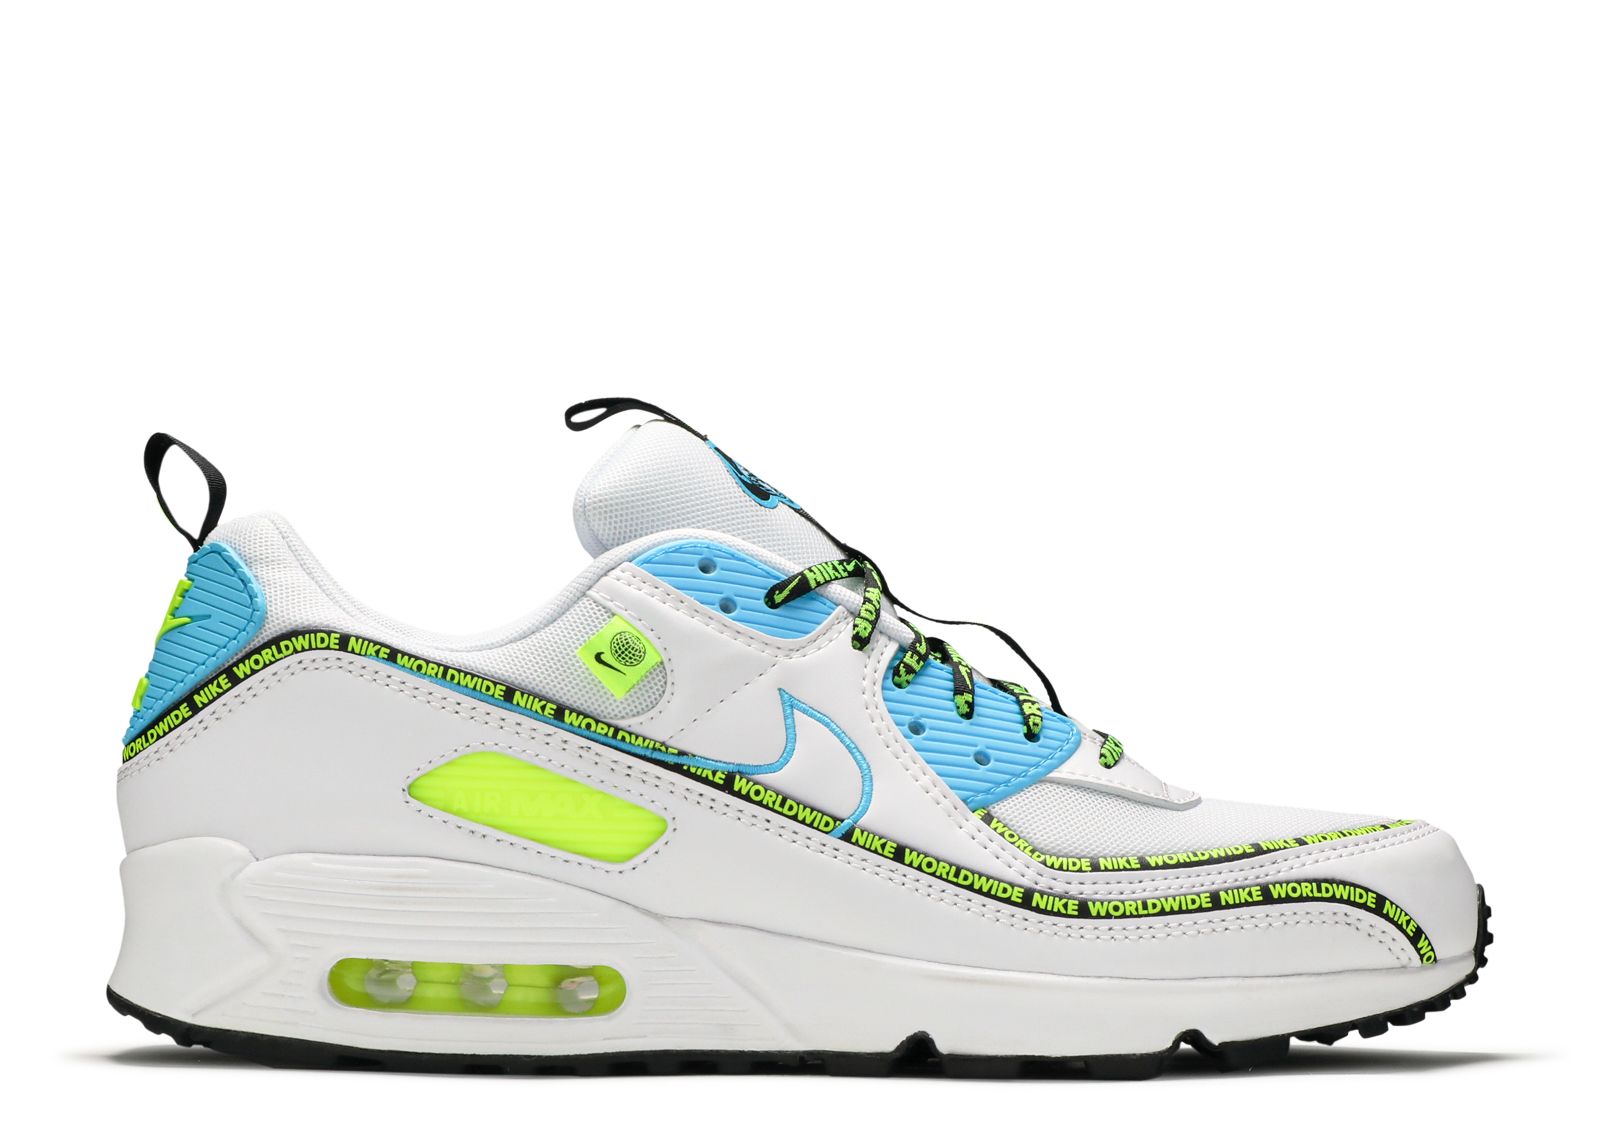 Кроссовки Nike Air Max 90 Se 'Worldwide Pack - Blue Fury Volt', белый authentic nike air max 95 men cherry blossom worldwide pack yin yang running shoes original trainers sports sneakers runners